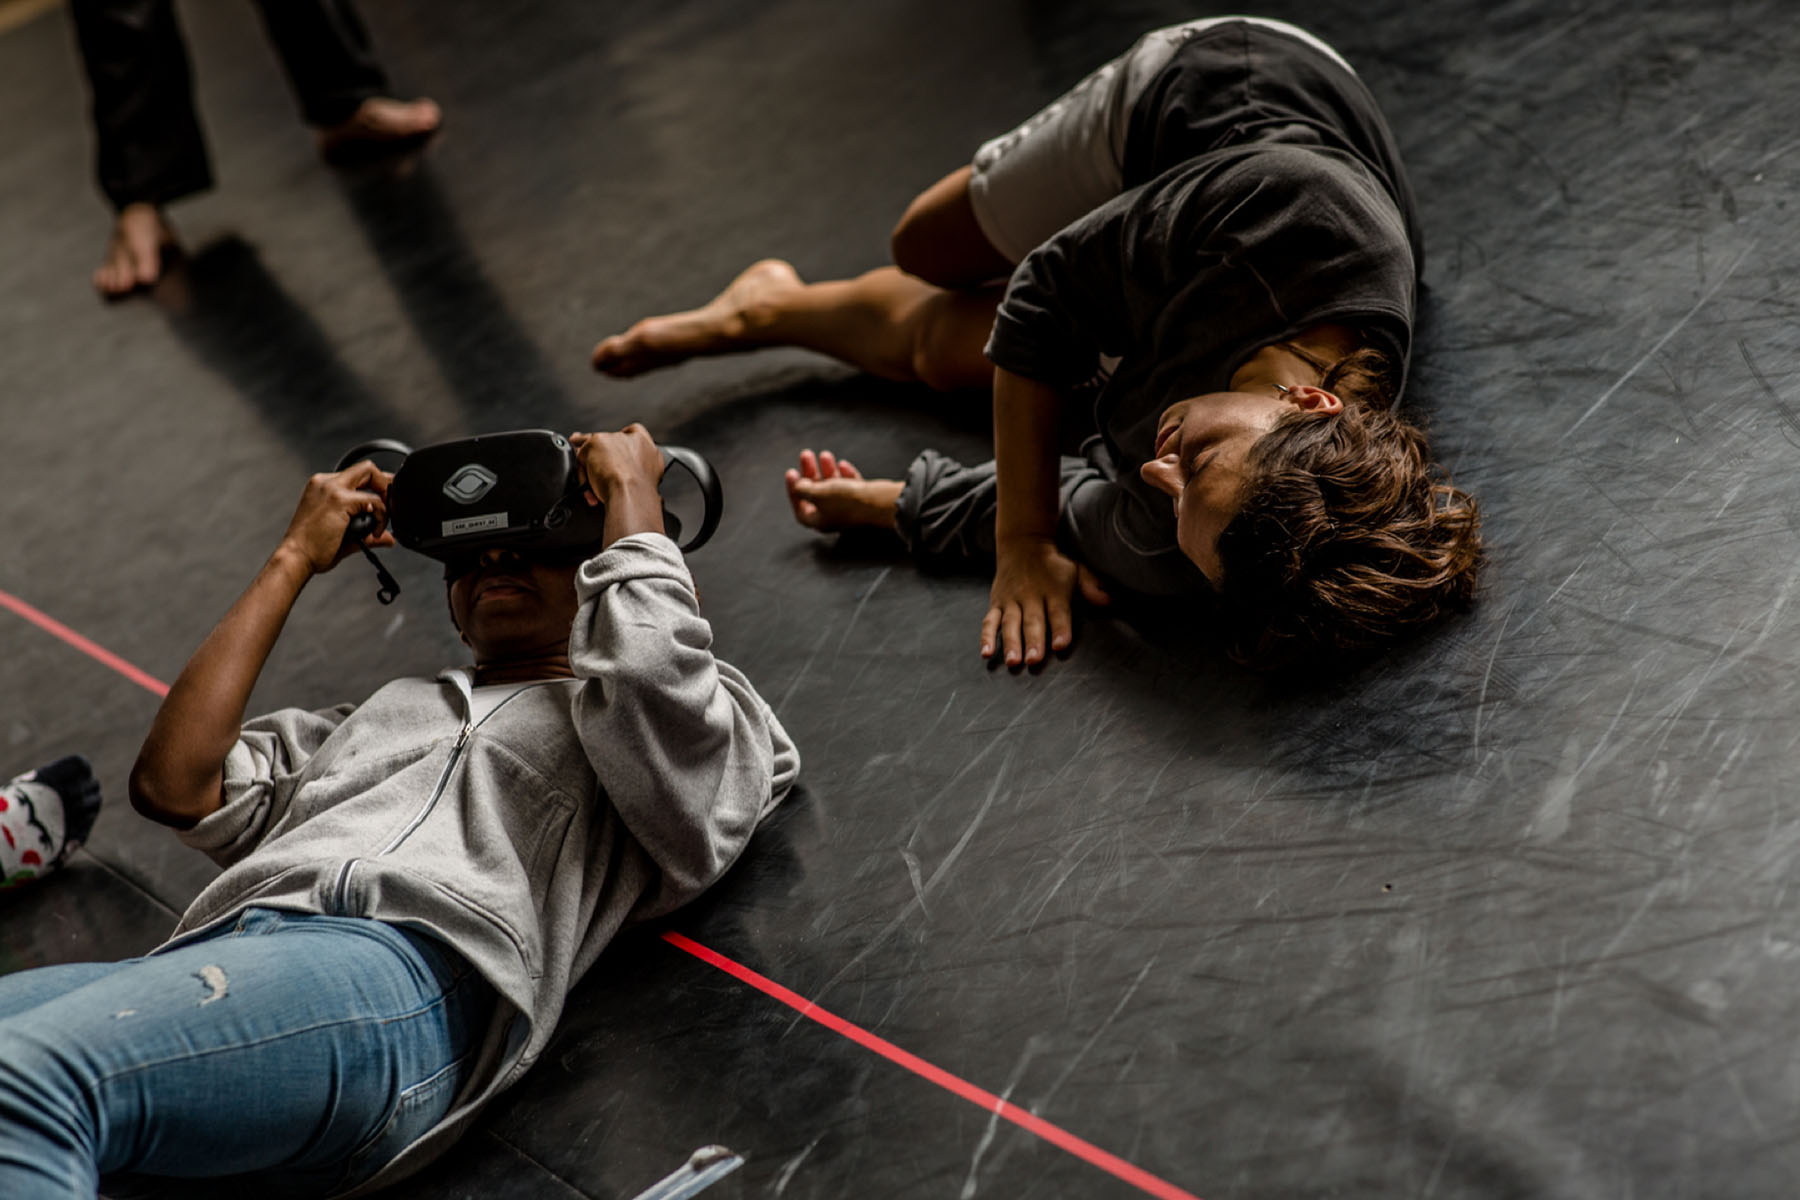 A dancer and a person lying on the floor one is wearing a VR headset